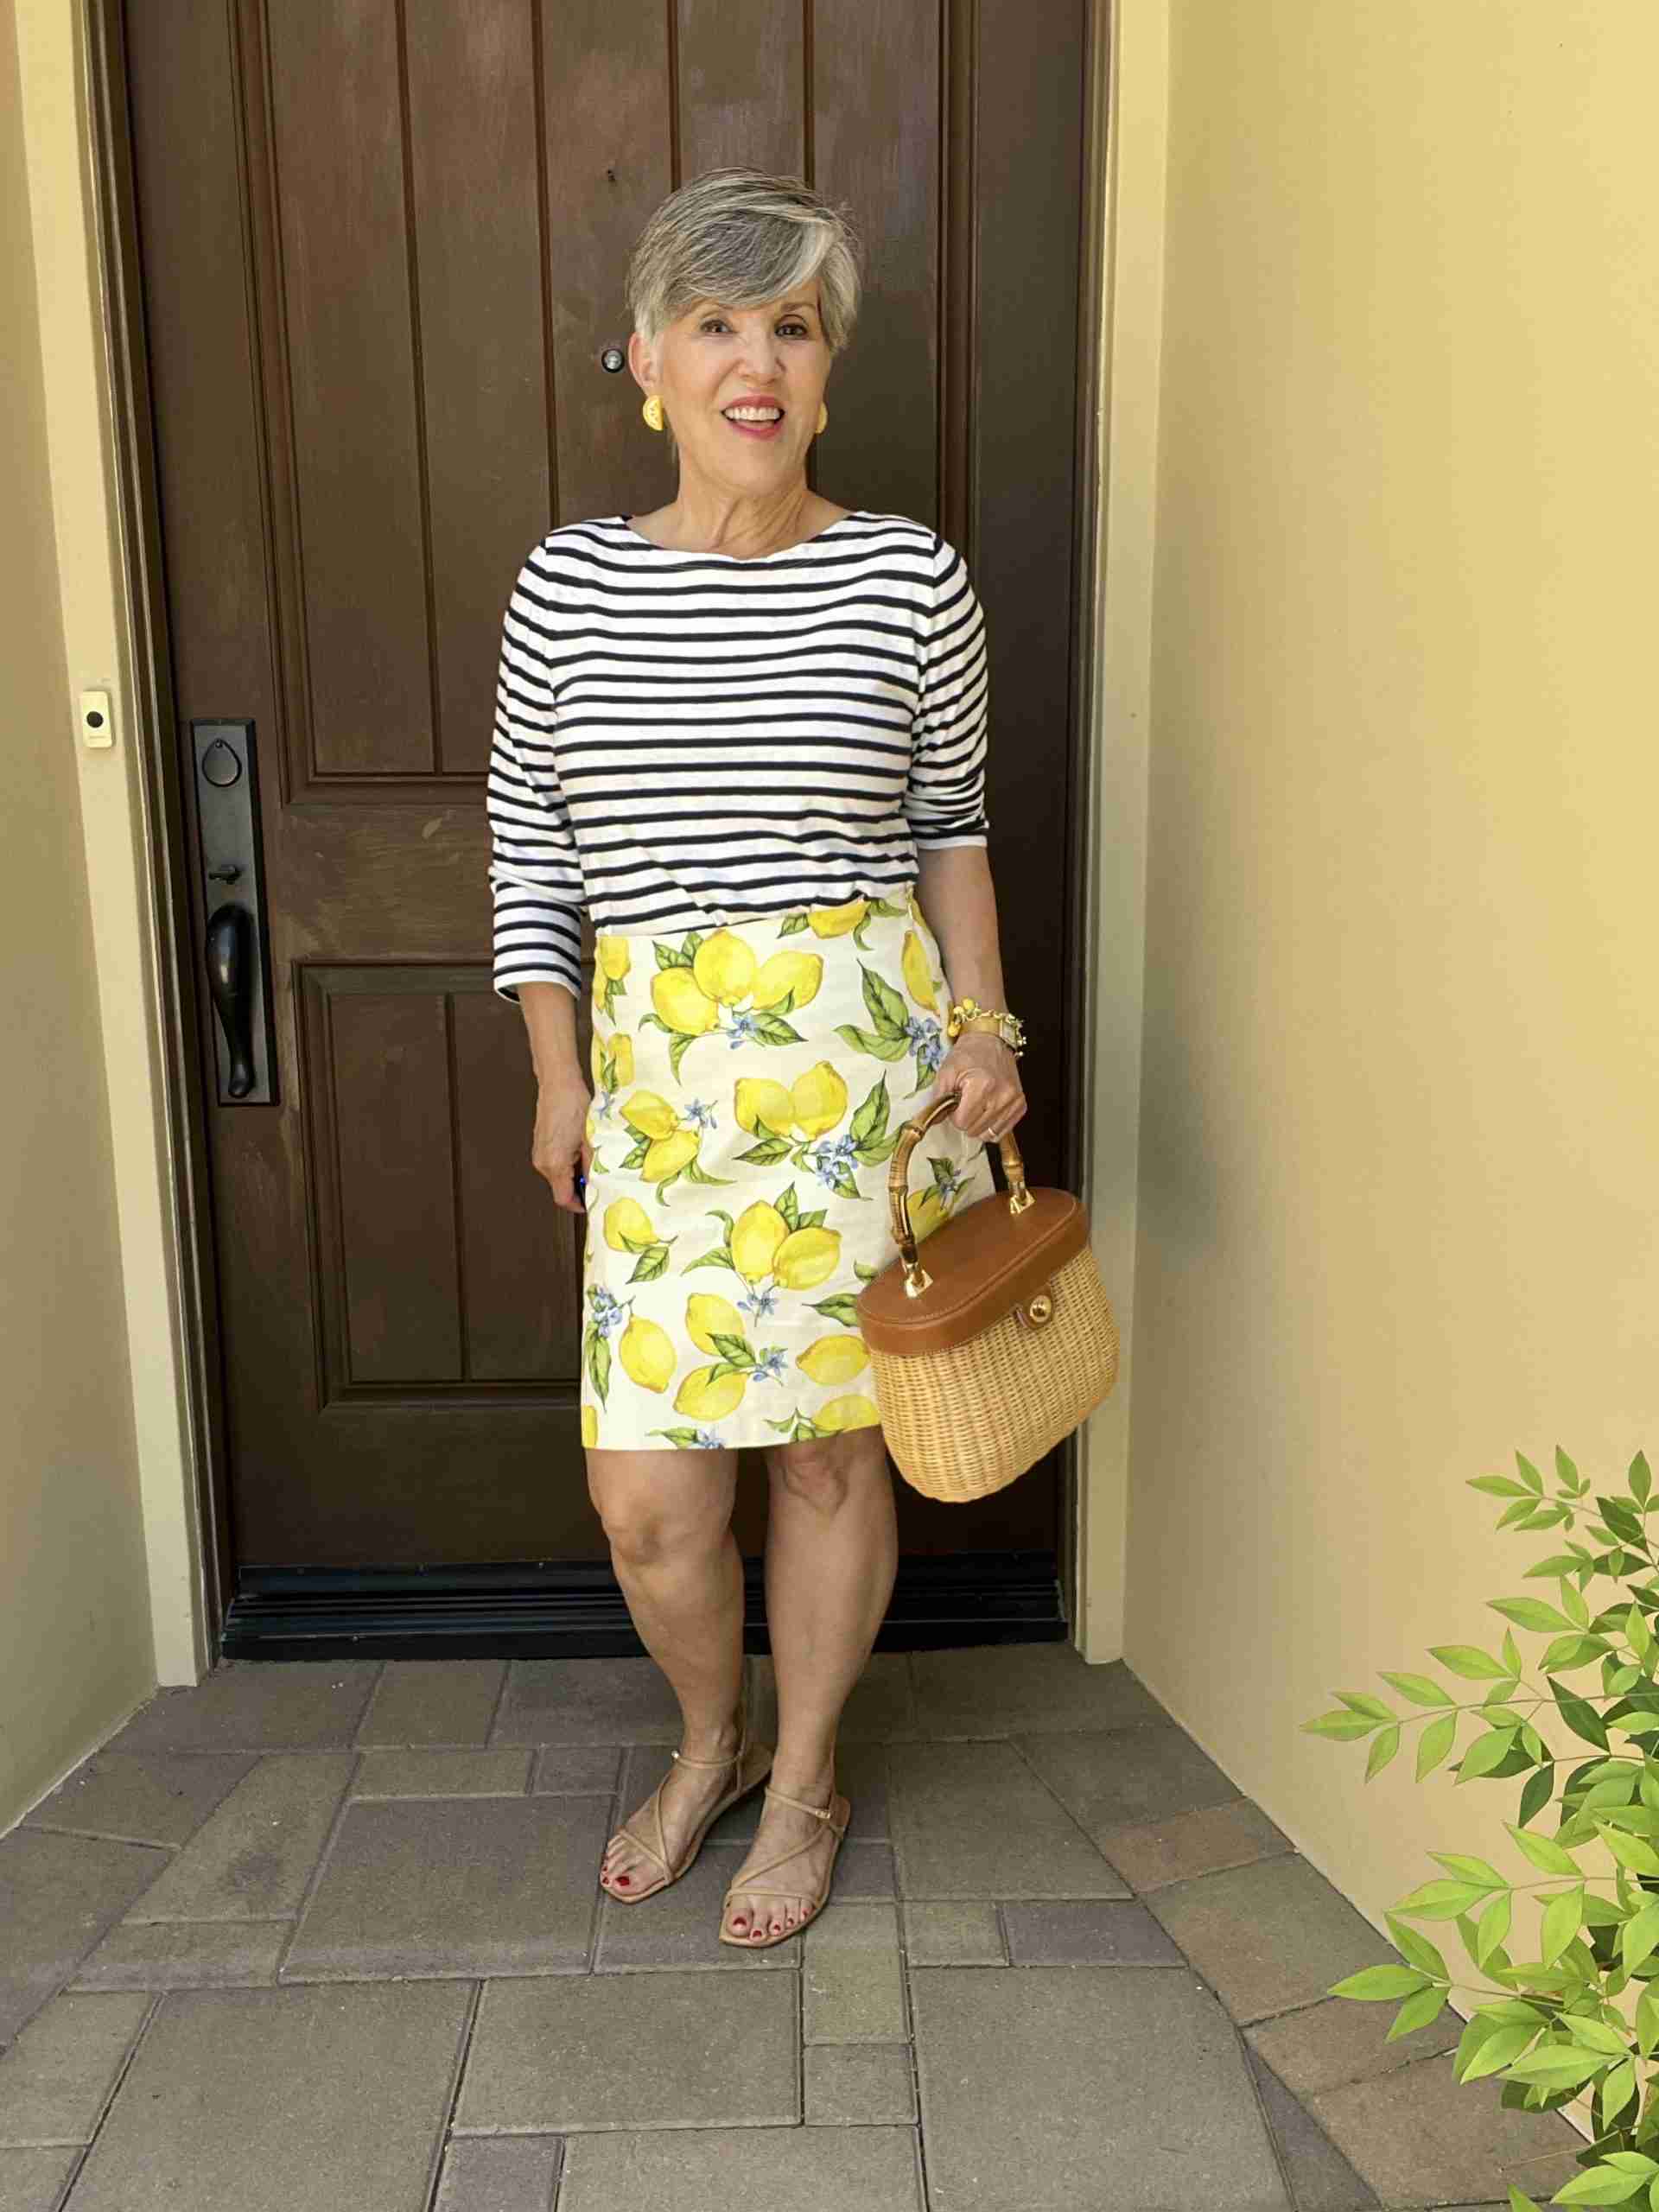 But, I was coming up with lots of lemon print outfits, so this one came to mind.  I wore the striped tee with the lemon print skirt.  I added the lemon earrings and even the lemon charm bracelet.  Is it too much?  Let me know below, please!   To neutralize all the patterns, I added nude flat sandals and a darling classic J McLaughlin wicker and leather purse.